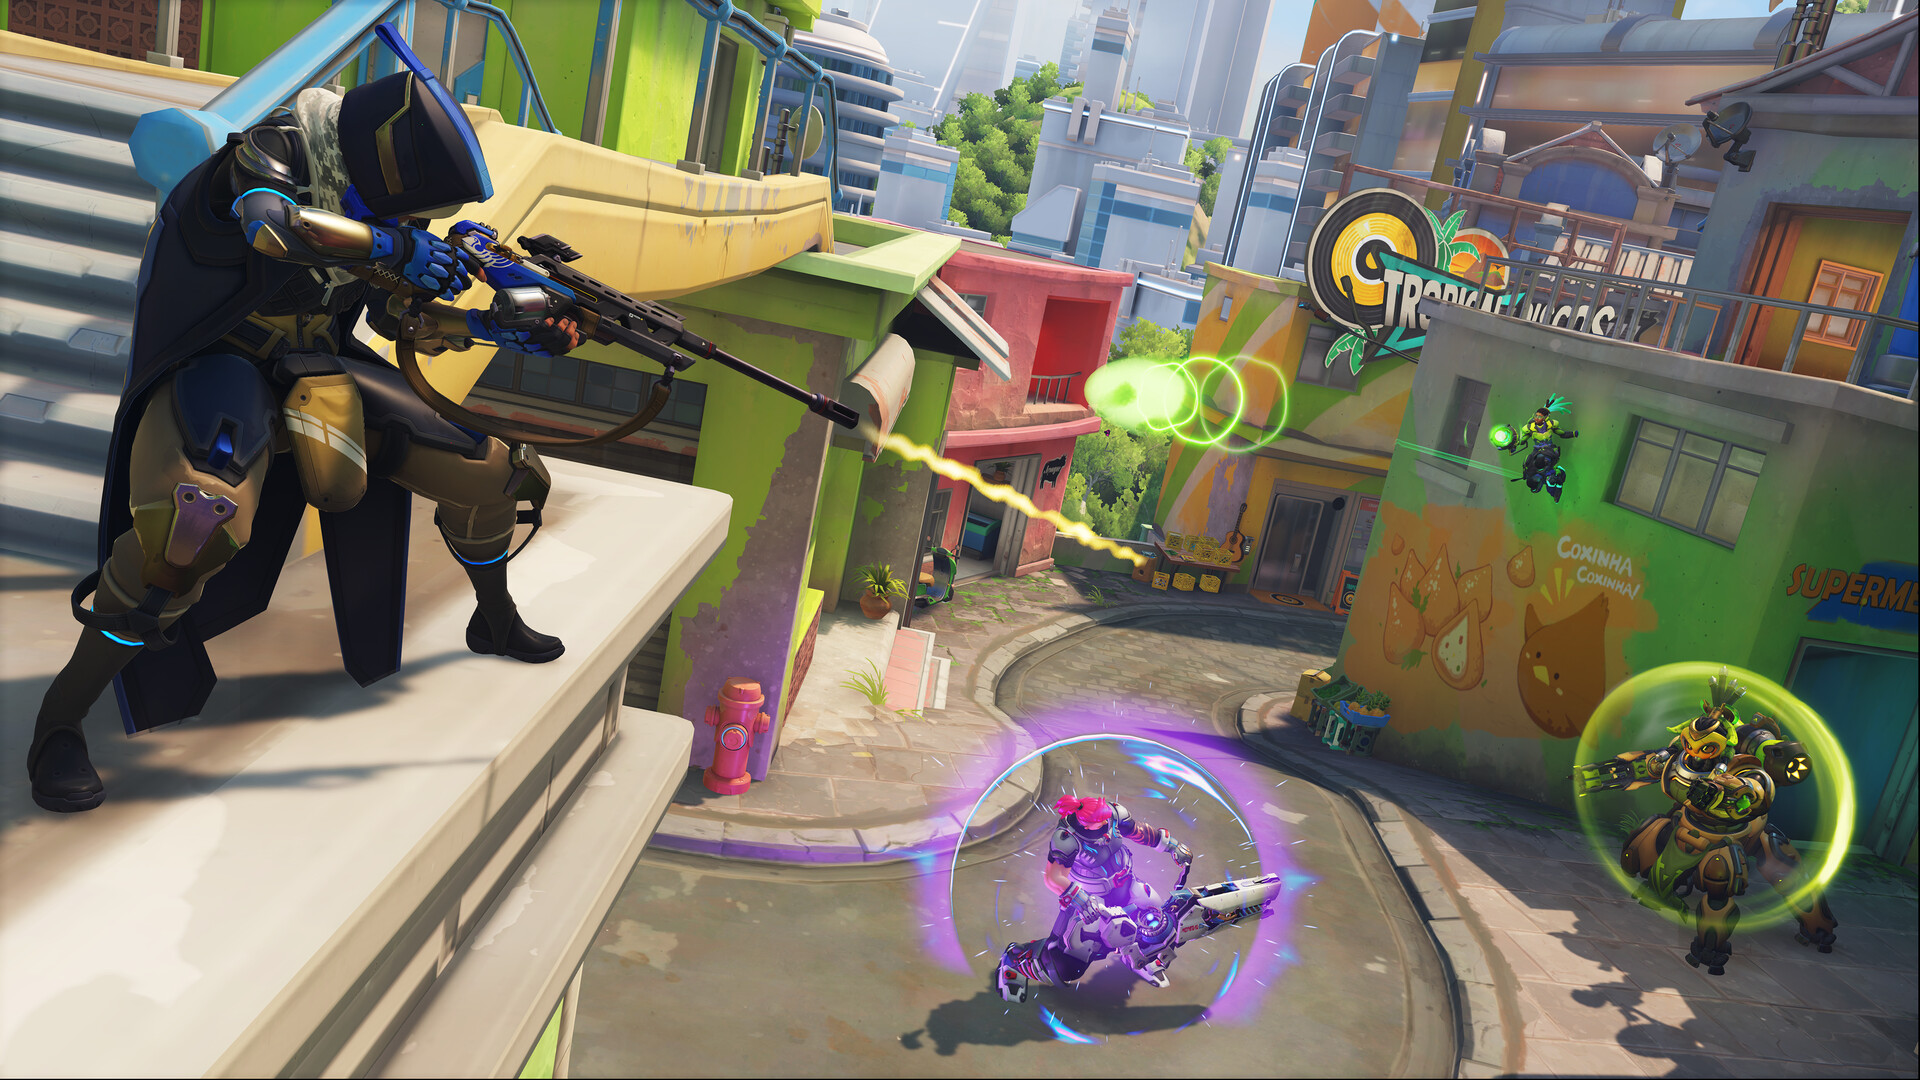 How To Download Overwatch On PC